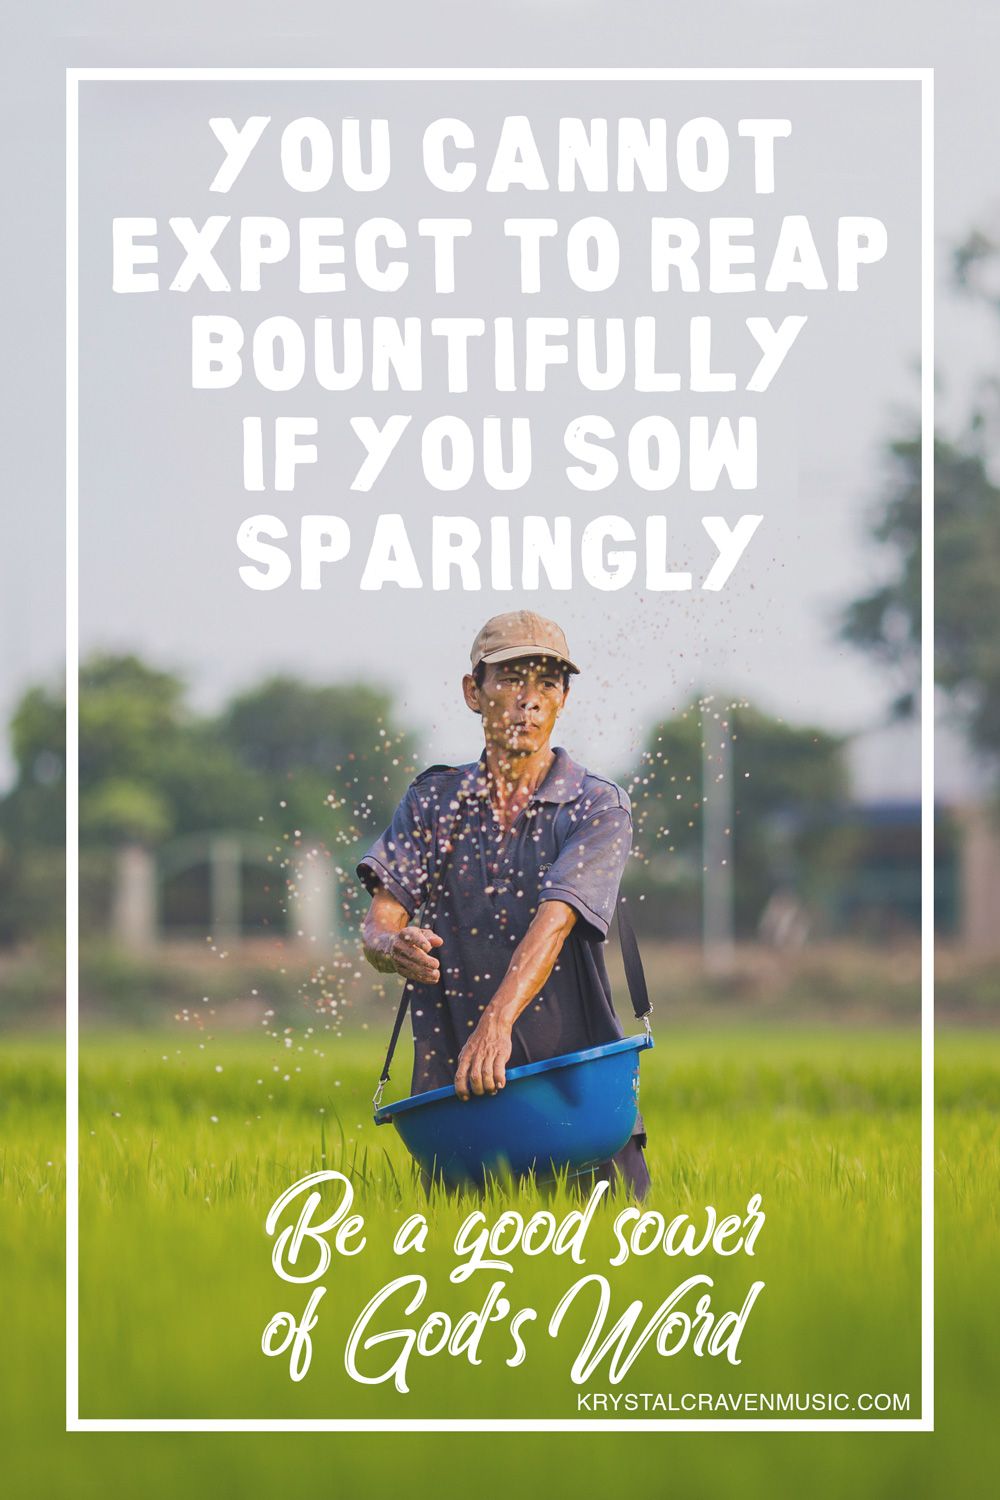 The text of "You cannot expect to reap bountifully if you sow sparingly. Be a good sower of God's Word" overlaying a man in a field with a large bucket, throwing a large handful of seeds.